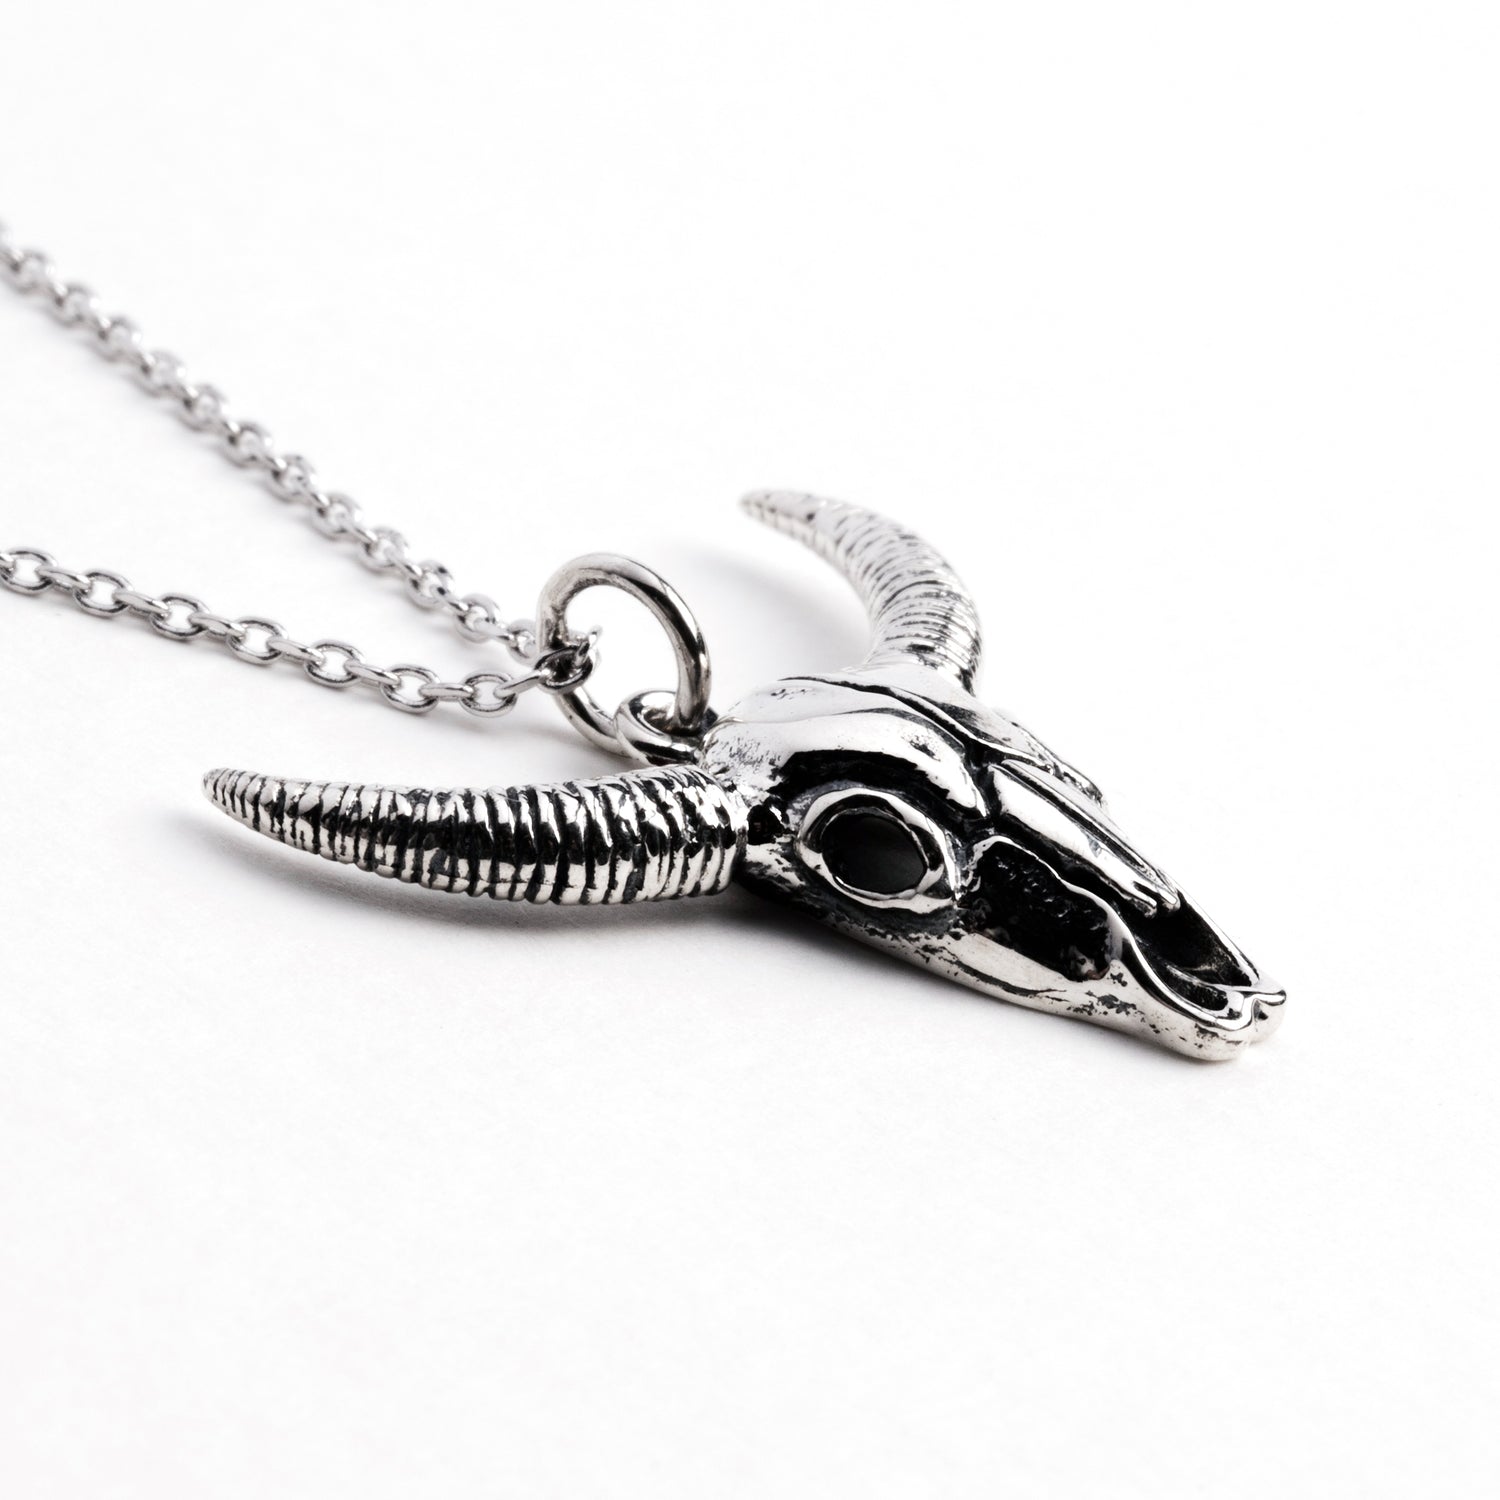 Bull skull silver charm necklace left side view